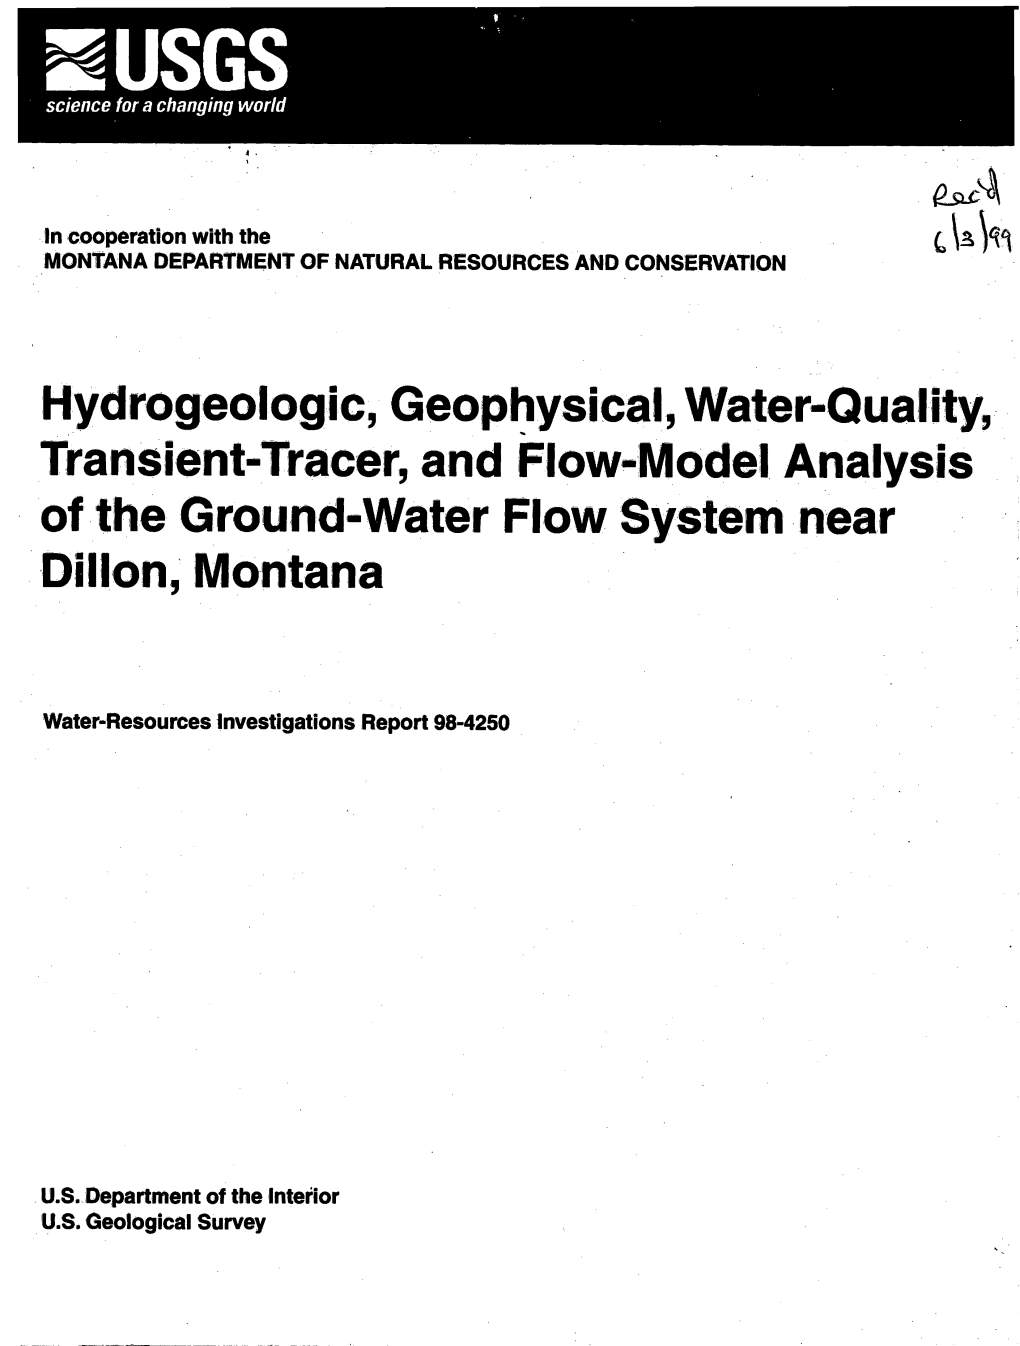 Hydrogeologic, Geophysical, Water-Quality, Transient-Tracer, and Flow-Model Analysis of the Ground-Water Flow System Near Dillon, Montana